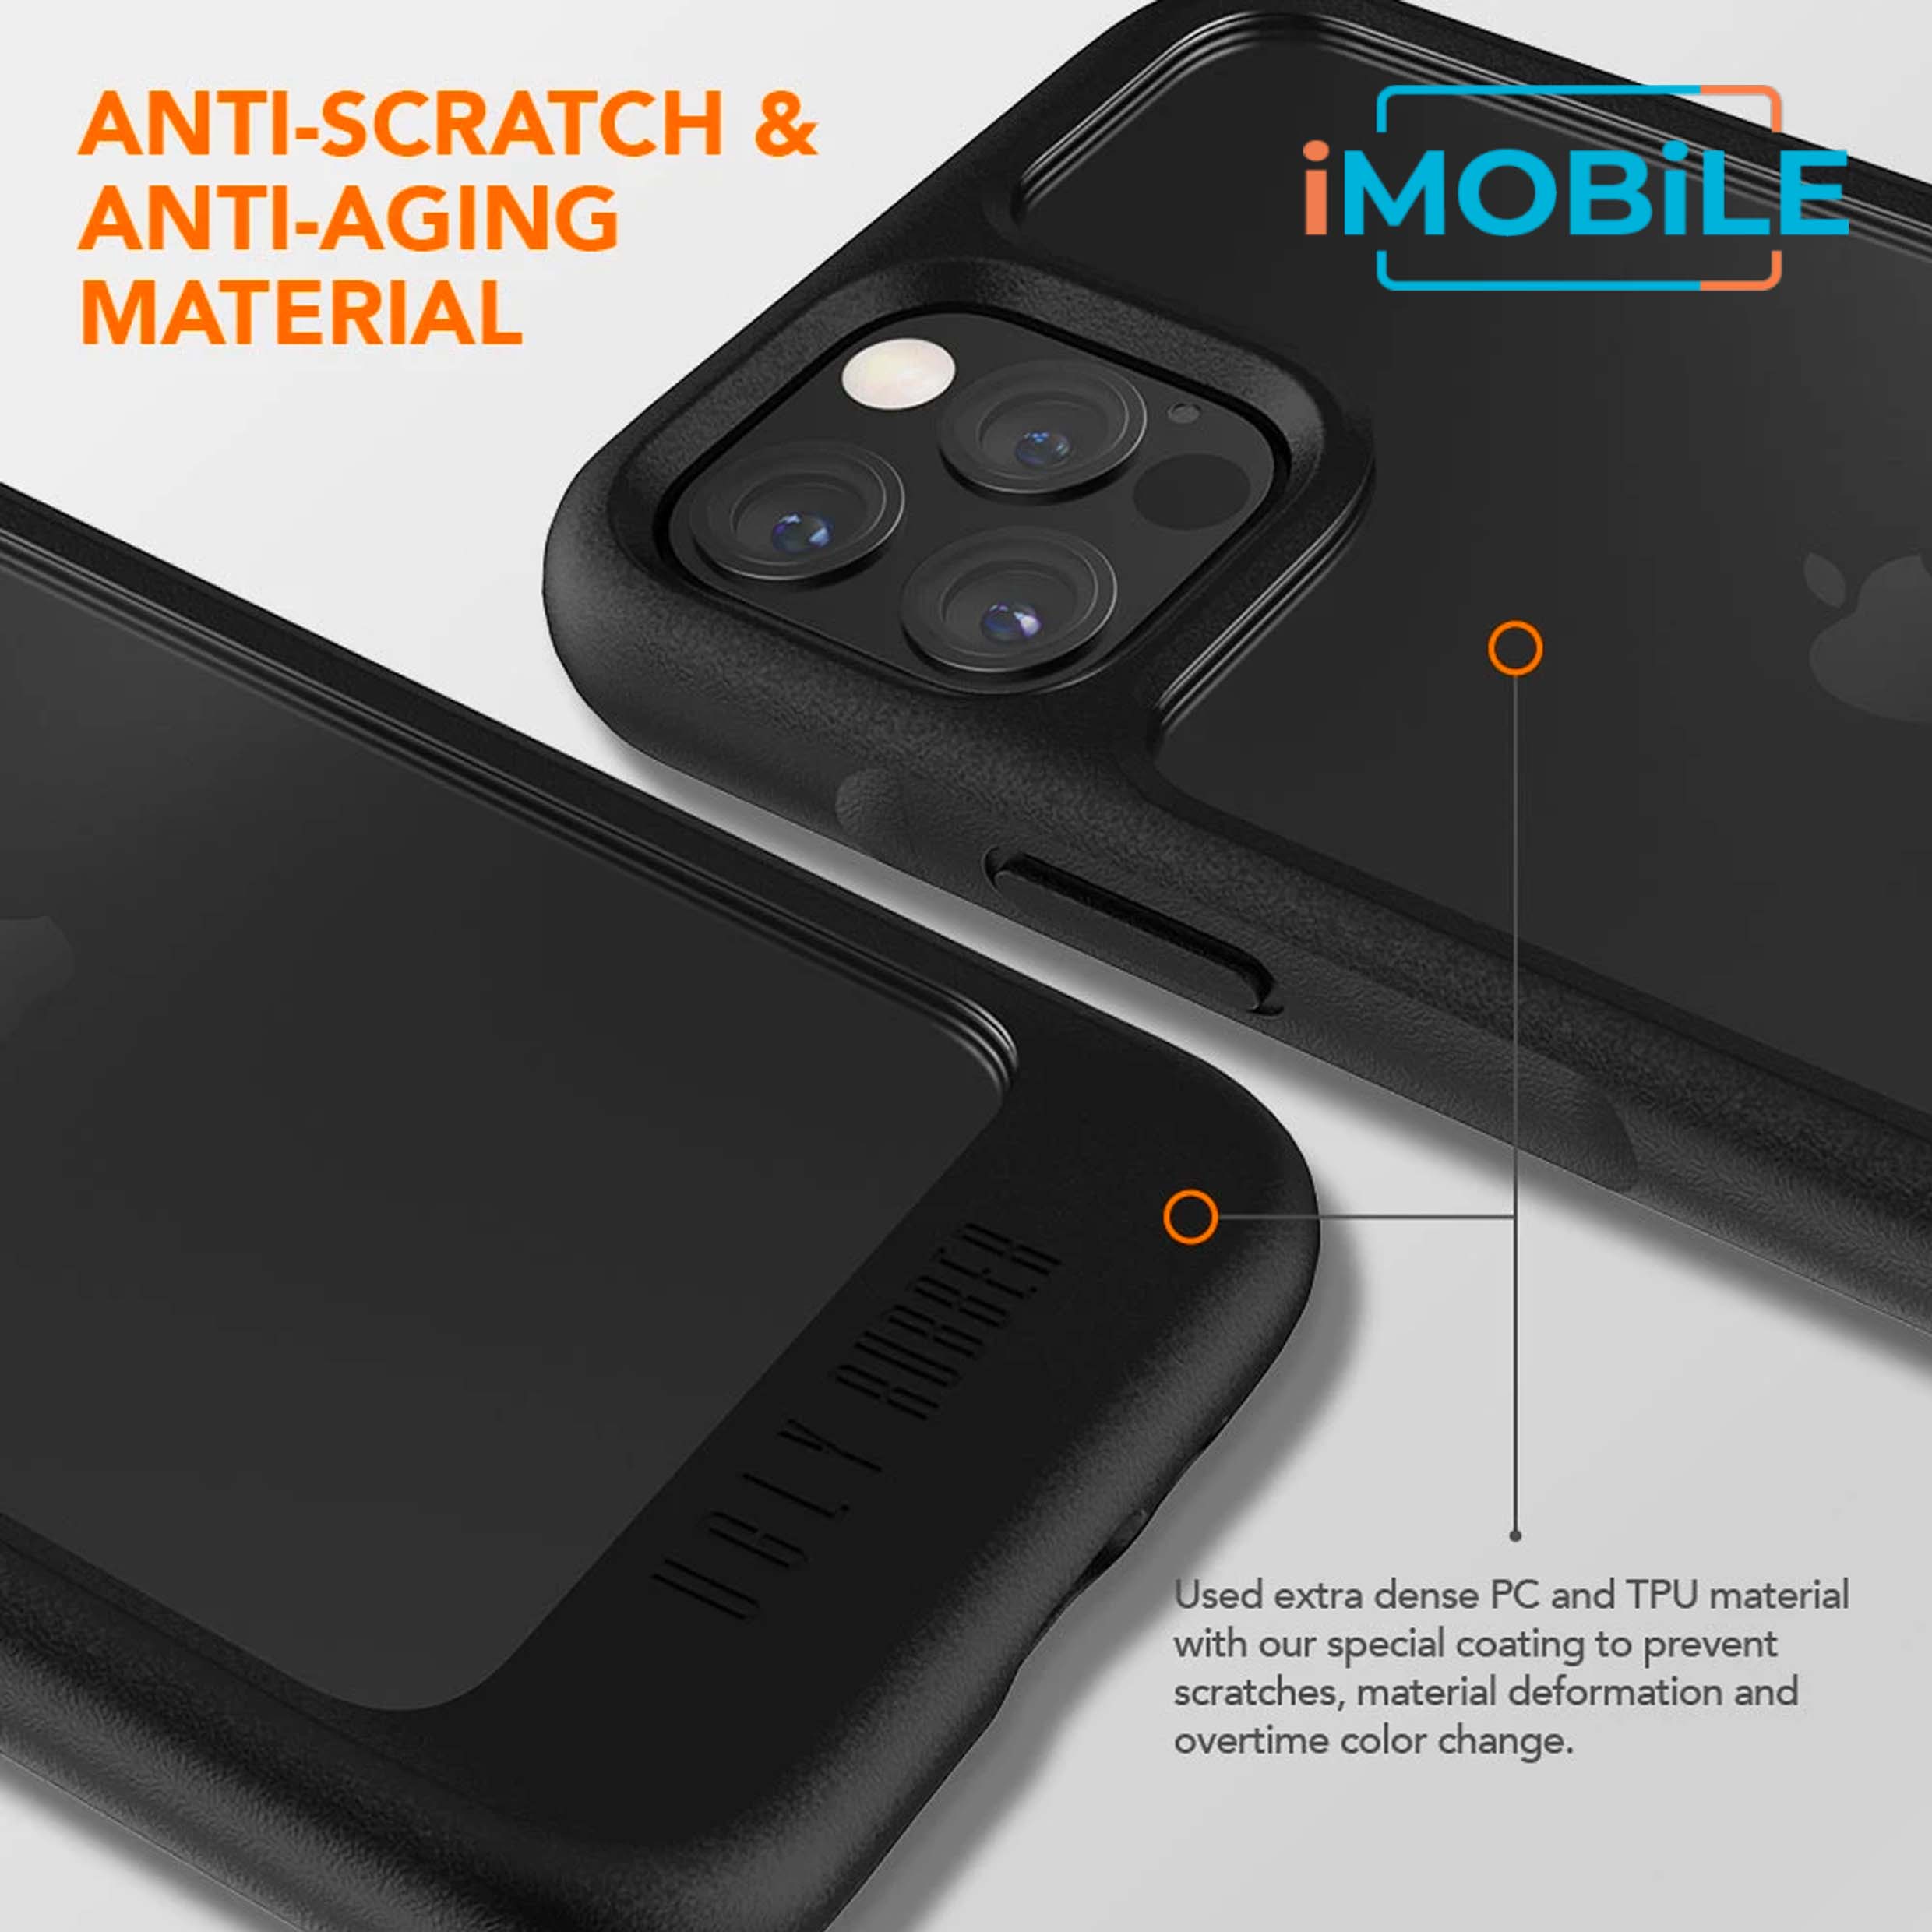 UR G-Model Case for iPhone 11 Pro [3m Drop Protection]